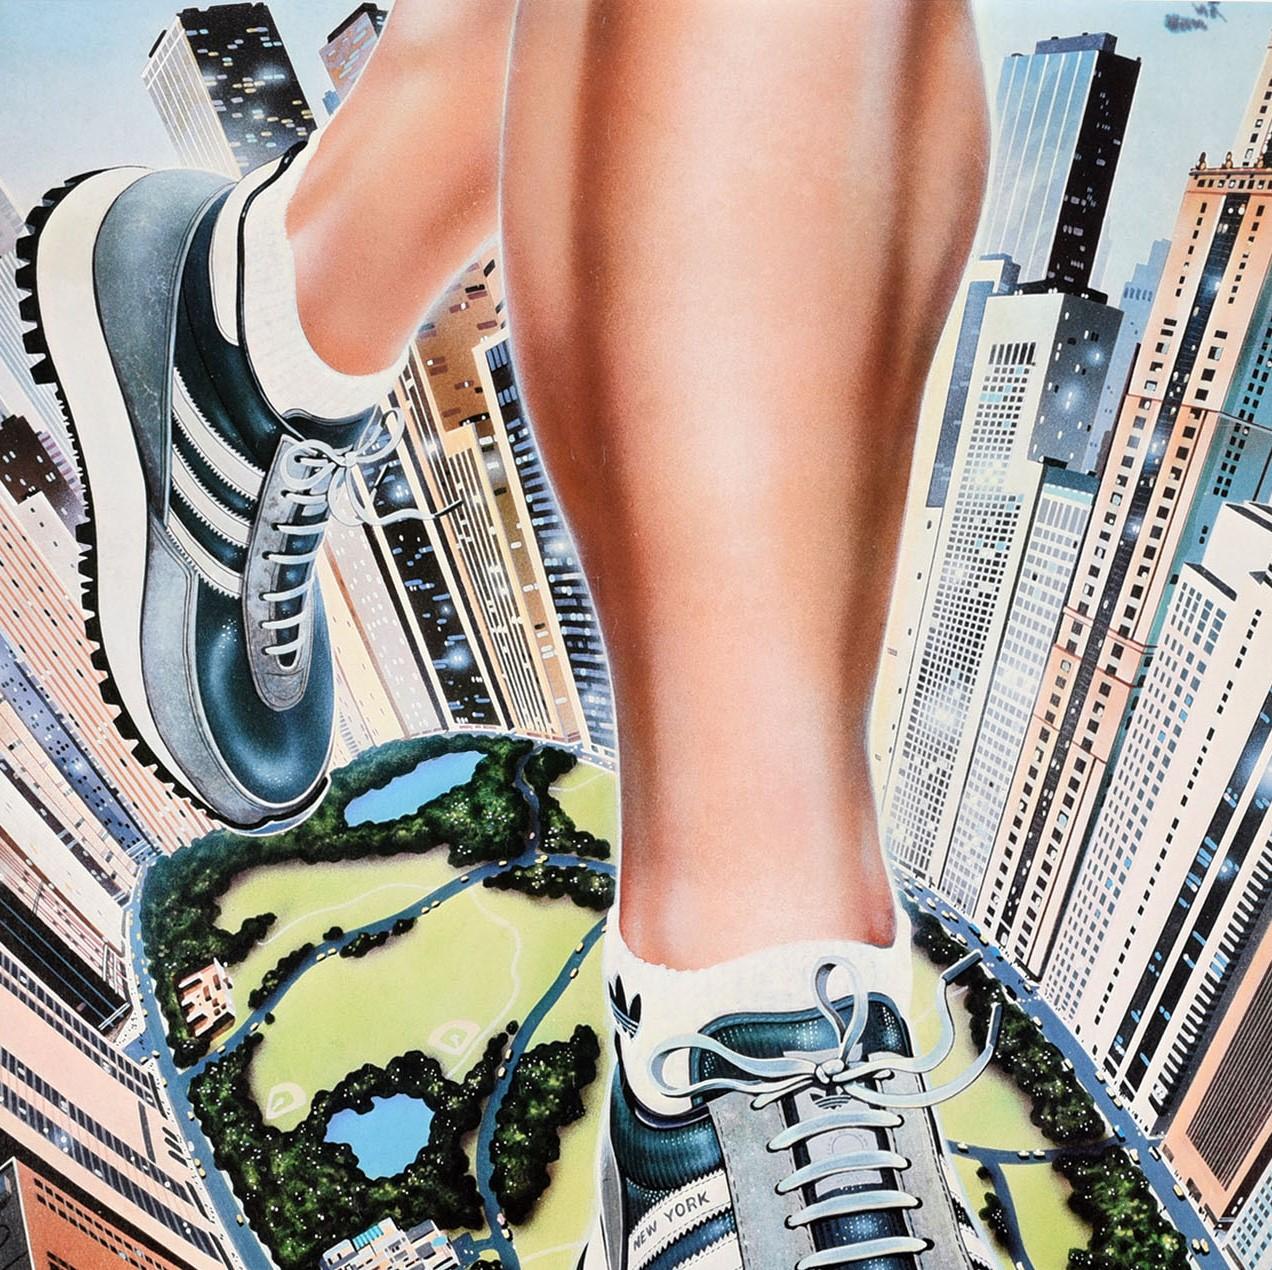 Original vintage sports shoe advertising poster for Adidas - Wherever you live, run in New York - featuring the legs of a runner wearing a pair of the fashionable and legendary 1980s Adidas Originals New York sneakers with a bird's eye view of the